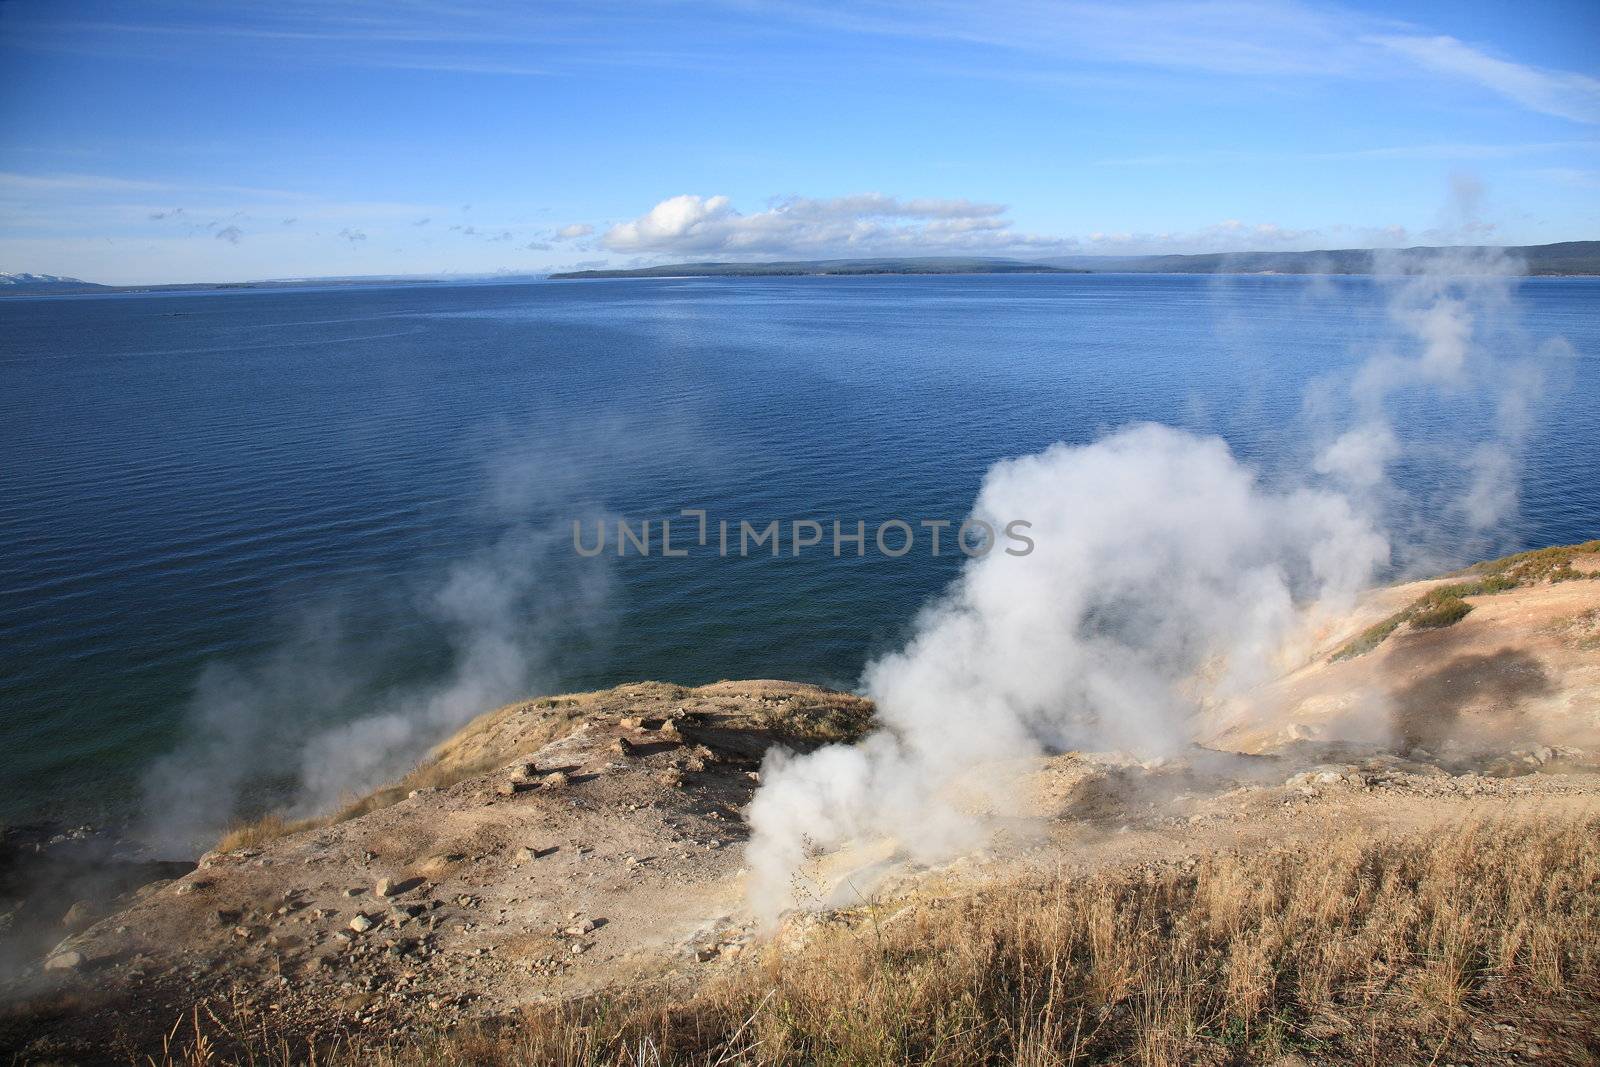 Mountain lake with steam rising from hot springs in foreground